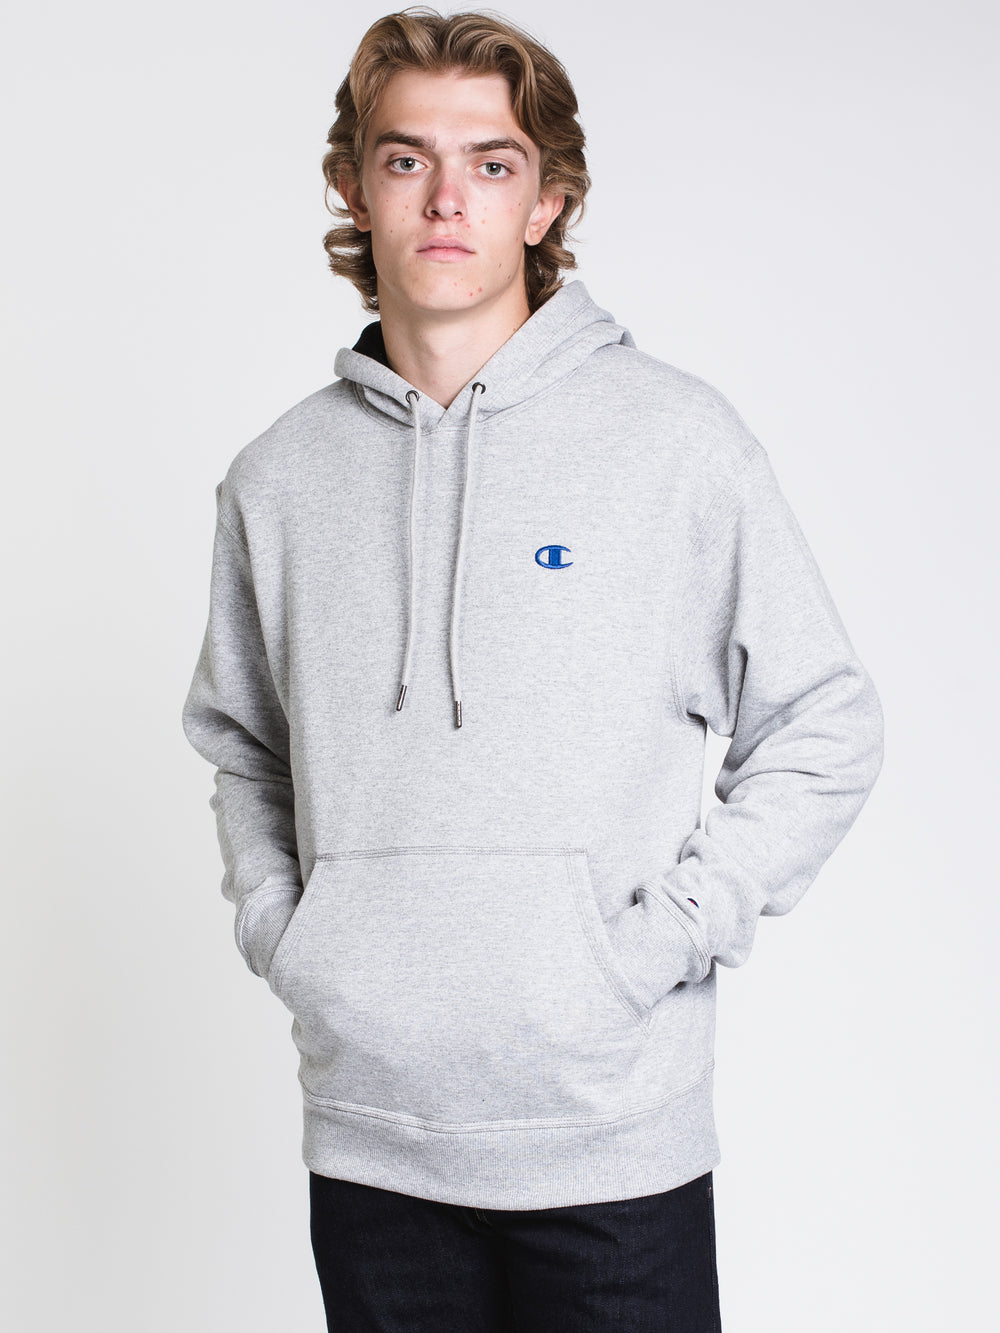 MENS COLOUR POP PULLOVER HOODIE - GREY/ROYAL - CLEARANCE